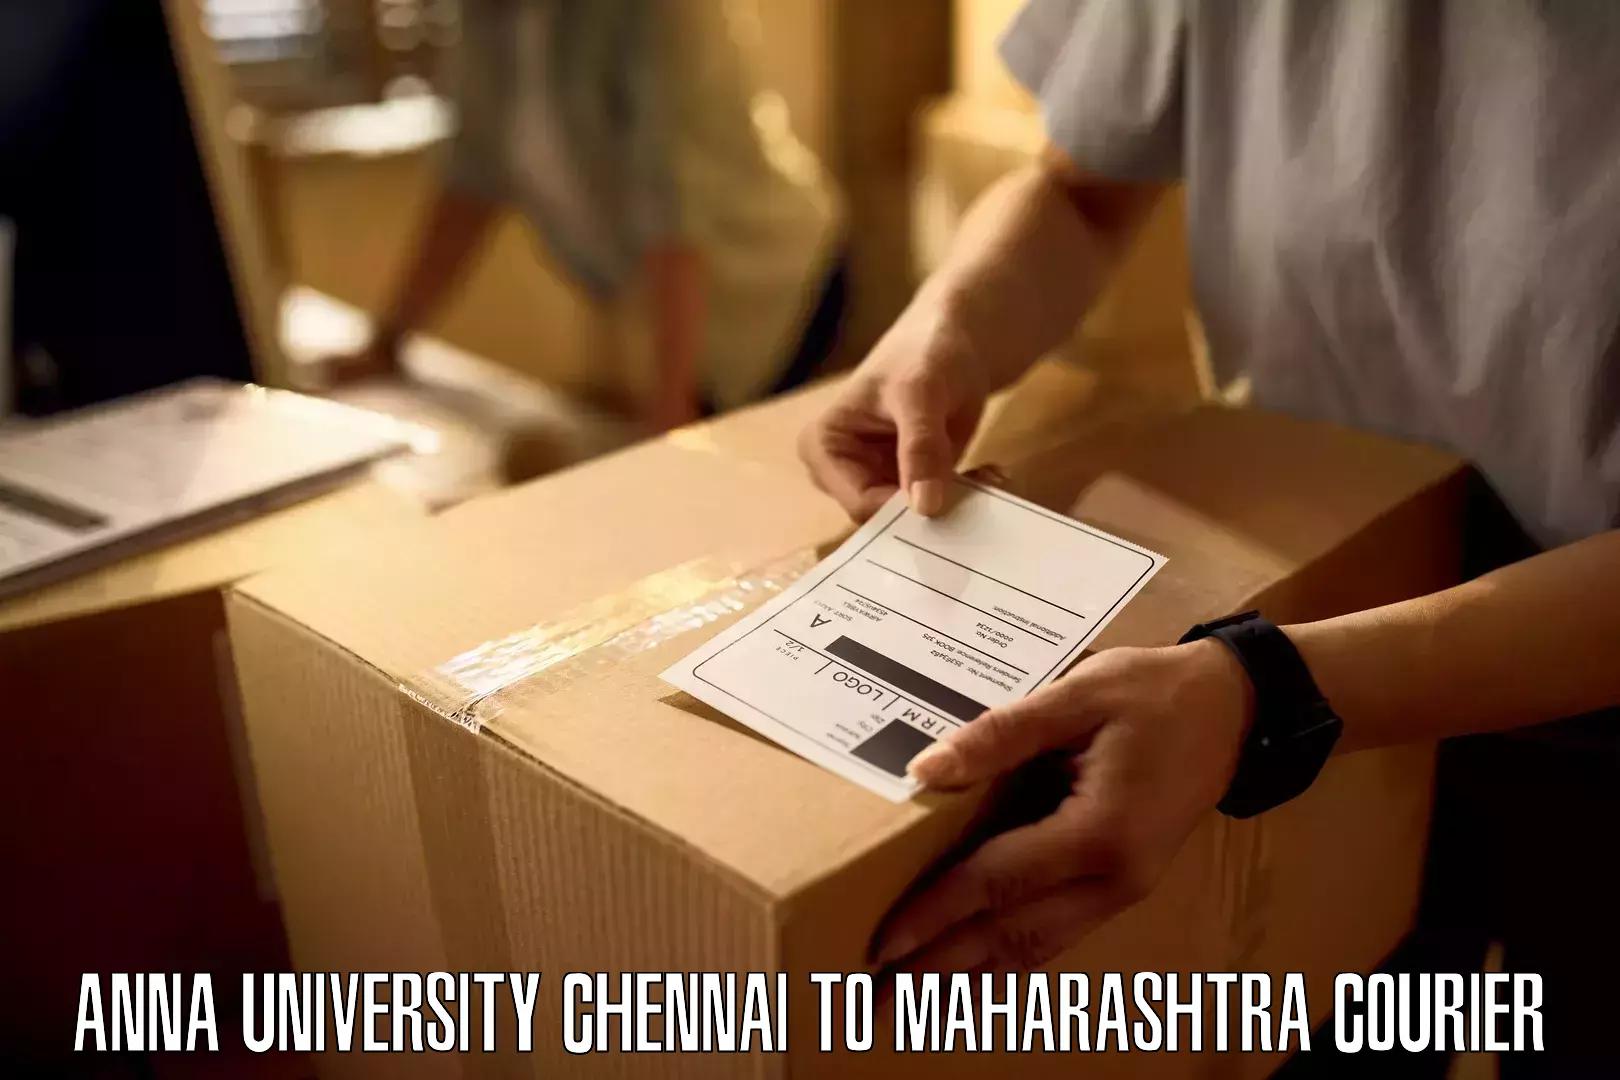 Affordable parcel rates in Anna University Chennai to Tuljapur